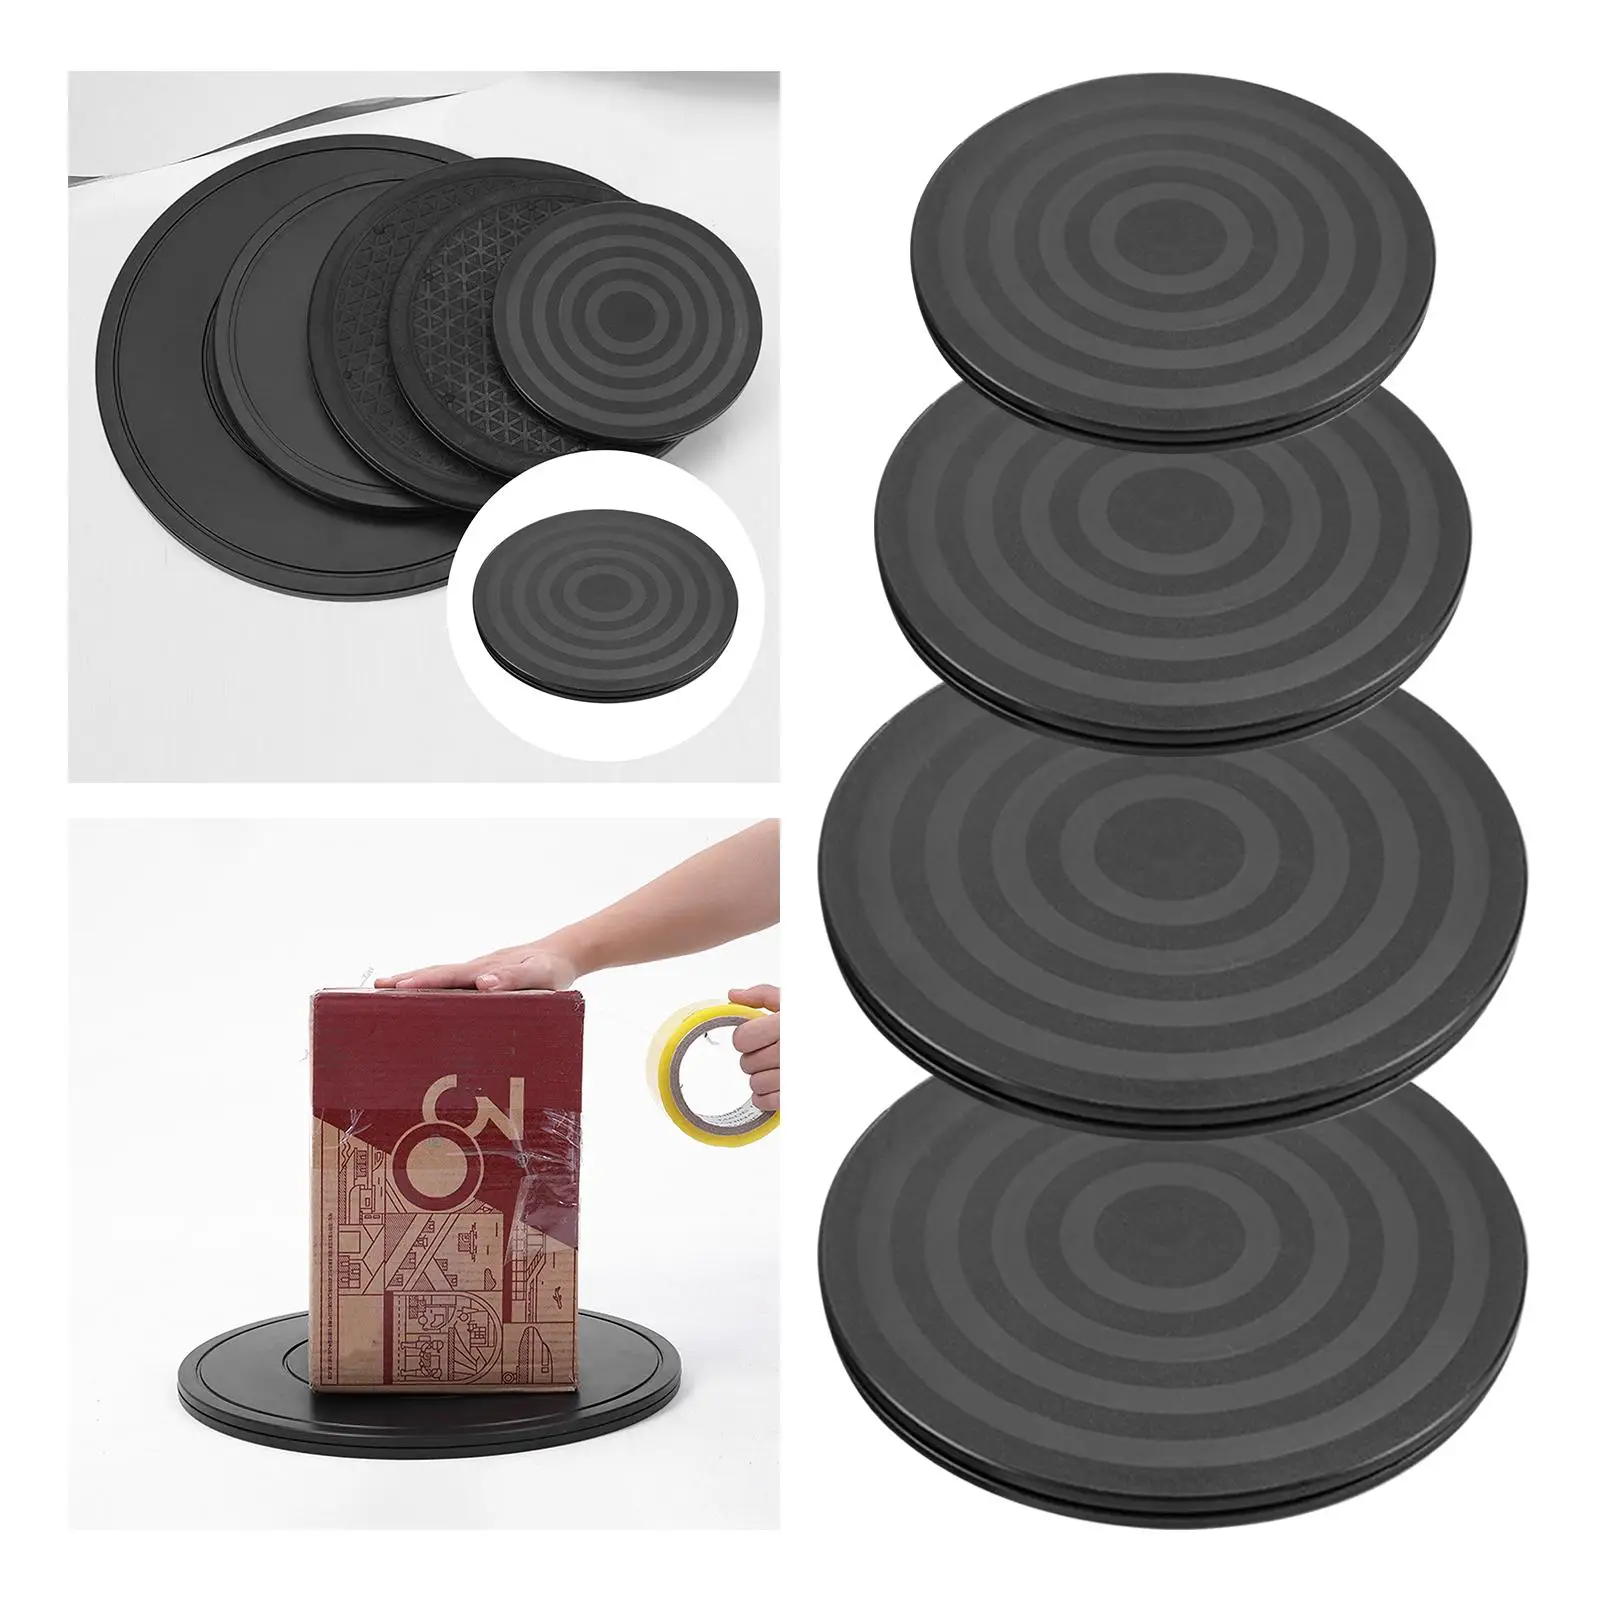 Rotating Swivel Plate 360 Degree Bonsai Rotating Non Slip Flexible Rotation Stand for Laptop Clay Crafts Pottery Wheel Monitors